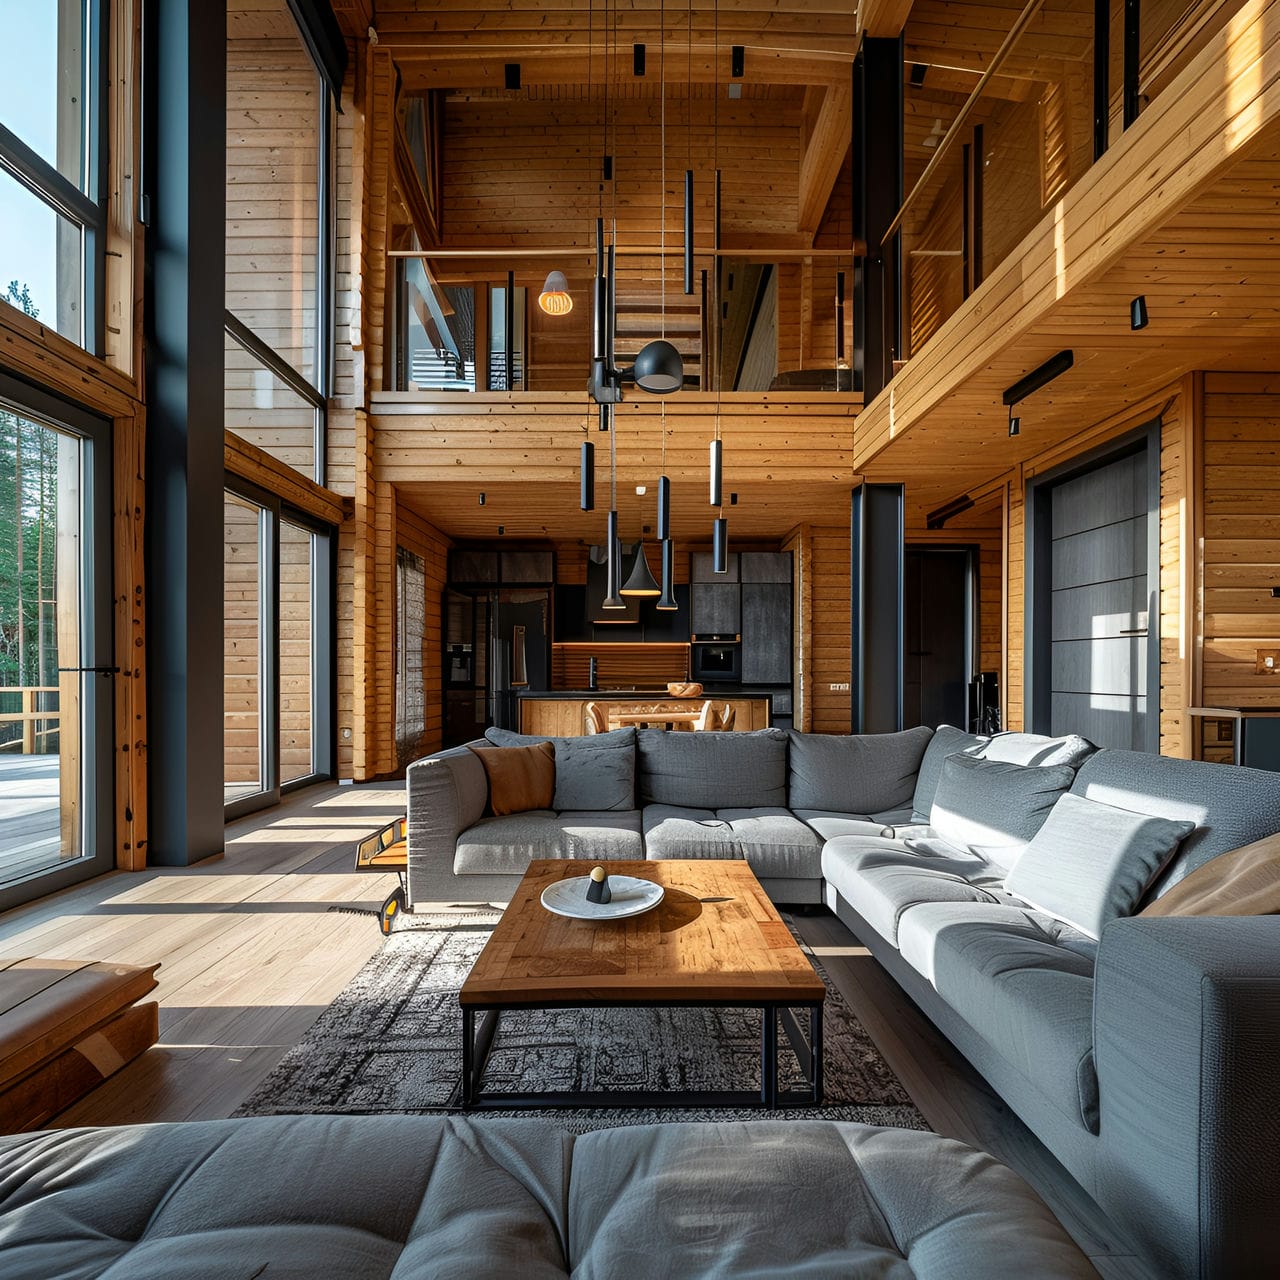 Log house: architecture, history, sustainability, materials, and typical prices